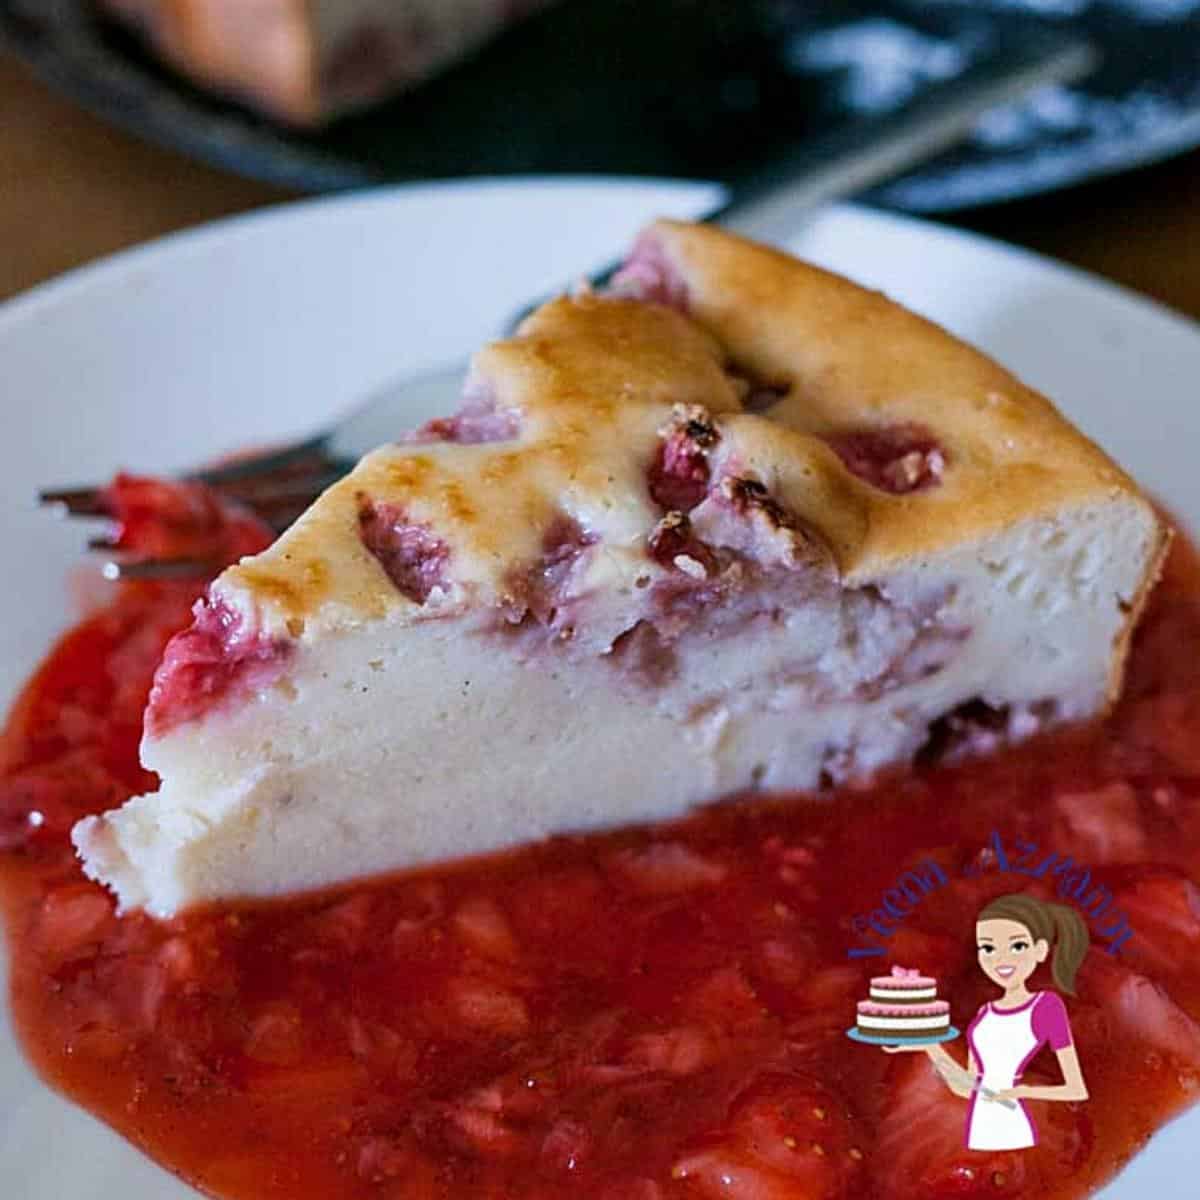 A slice of cheesecake on a plate with strawberry sauce.